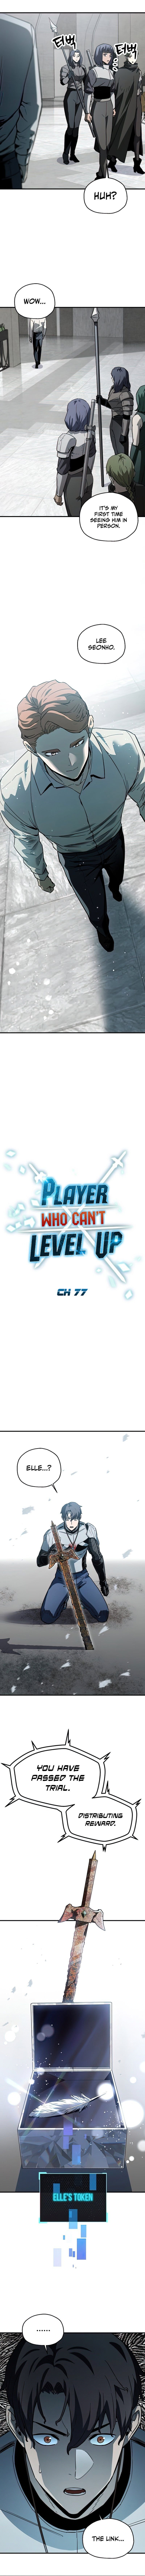 the-player-that-cant-level-up-chap-77-2